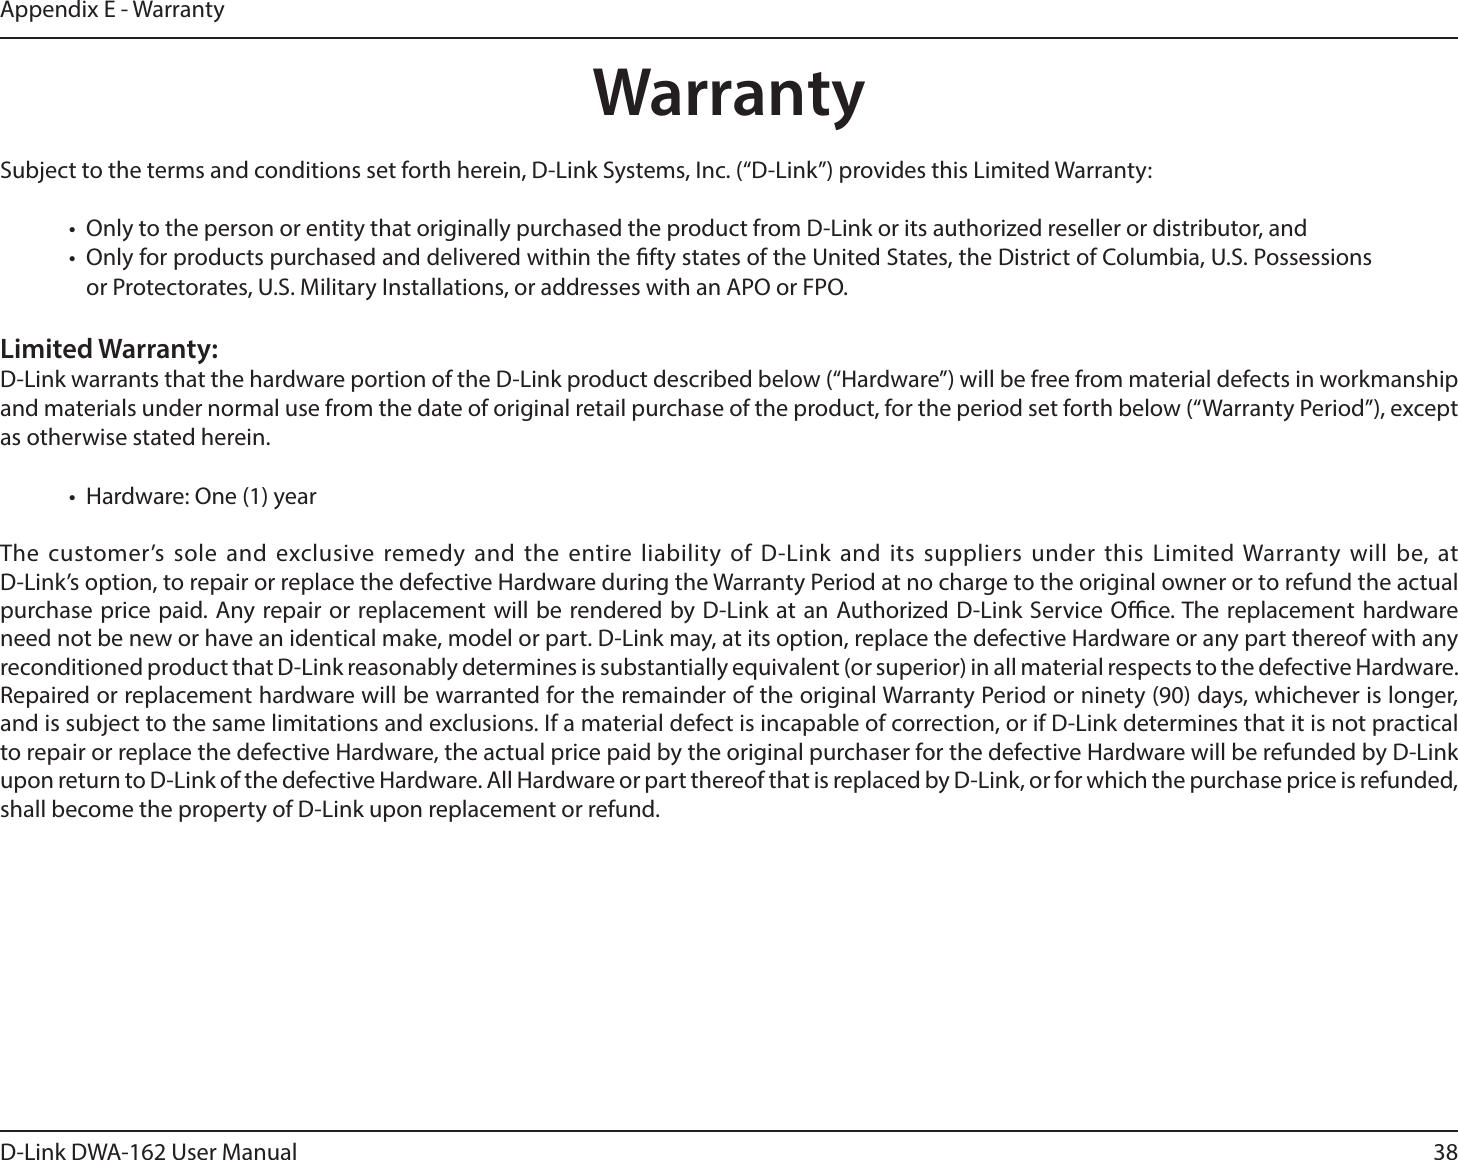 38D-Link DWA-162 User ManualAppendix E - WarrantyWarrantySubject to the terms and conditions set forth herein, D-Link Systems, Inc. (“D-Link”) provides this Limited Warranty:t 0OMZUPUIFQFSTPOPSFOUJUZUIBUPSJHJOBMMZQVSDIBTFEUIFQSPEVDUGSPN%-JOLPSJUTBVUIPSJ[FESFTFMMFSPSEJTUSJCVUPSBOEt 0OMZGPSQSPEVDUTQVSDIBTFEBOEEFMJWFSFEXJUIJOUIFöGUZTUBUFTPGUIF6OJUFE4UBUFTUIF%JTUSJDUPG$PMVNCJB641PTTFTTJPOTor Protectorates, U.S. Military Installations, or addresses with an APO or FPO.Limited Warranty:D-Link warrants that the hardware portion of the D-Link product described below (“Hardware”) will be free from material defects in workmanship and materials under normal use from the date of original retail purchase of the product, for the period set forth below (“Warranty Period”), except as otherwise stated herein.t )BSEXBSF0OFZFBSThe customer’s sole and exclusive remedy and the entire liability of D-Link and its suppliers under this Limited Warranty will be, at  D-Link’s option, to repair or replace the defective Hardware during the Warranty Period at no charge to the original owner or to refund the actual purchase price paid. Any repair or replacement will be rendered by D-Link at an Authorized D-Link Service Oce. The replacement hardware need not be new or have an identical make, model or part. D-Link may, at its option, replace the defective Hardware or any part thereof with any SFDPOEJUJPOFEQSPEVDUUIBU%-JOLSFBTPOBCMZEFUFSNJOFTJTTVCTUBOUJBMMZFRVJWBMFOUPSTVQFSJPSJOBMMNBUFSJBMSFTQFDUTUPUIFEFGFDUJWF)BSEXBSF3FQBJSFEPSSFQMBDFNFOUIBSEXBSFXJMMCFXBSSBOUFEGPSUIFSFNBJOEFSPGUIFPSJHJOBM8BSSBOUZ1FSJPEPSOJOFUZEBZTXIJDIFWFSJTMPOHFSand is subject to the same limitations and exclusions. If a material defect is incapable of correction, or if D-Link determines that it is not practical to repair or replace the defective Hardware, the actual price paid by the original purchaser for the defective Hardware will be refunded by D-Link upon return to D-Link of the defective Hardware. All Hardware or part thereof that is replaced by D-Link, or for which the purchase price is refunded, shall become the property of D-Link upon replacement or refund.